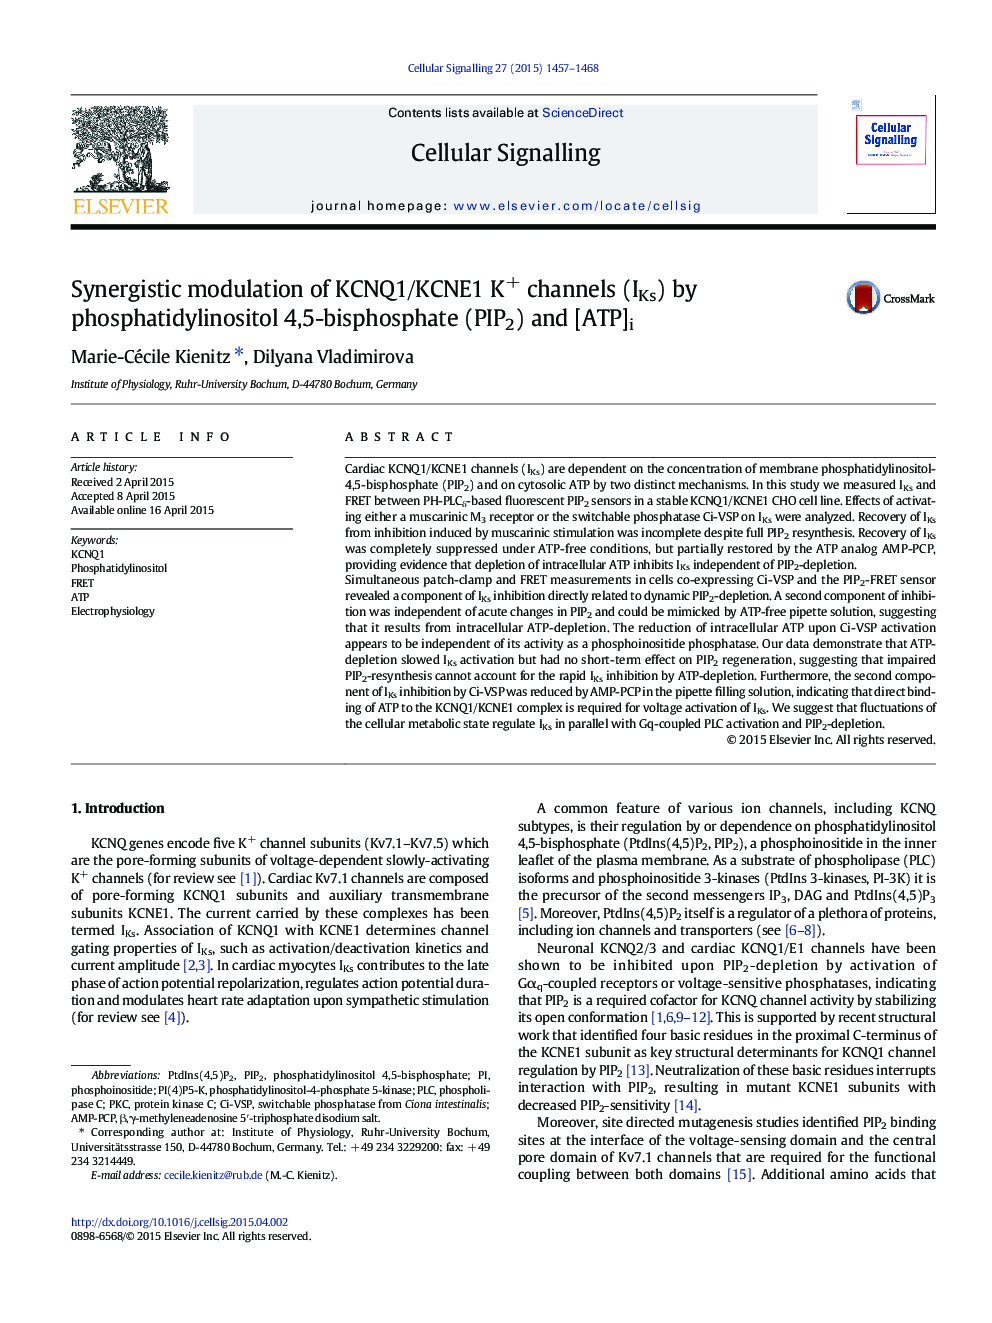 Synergistic modulation of KCNQ1/KCNE1 K+ channels (IKs) by phosphatidylinositol 4,5-bisphosphate (PIP2) and [ATP]i